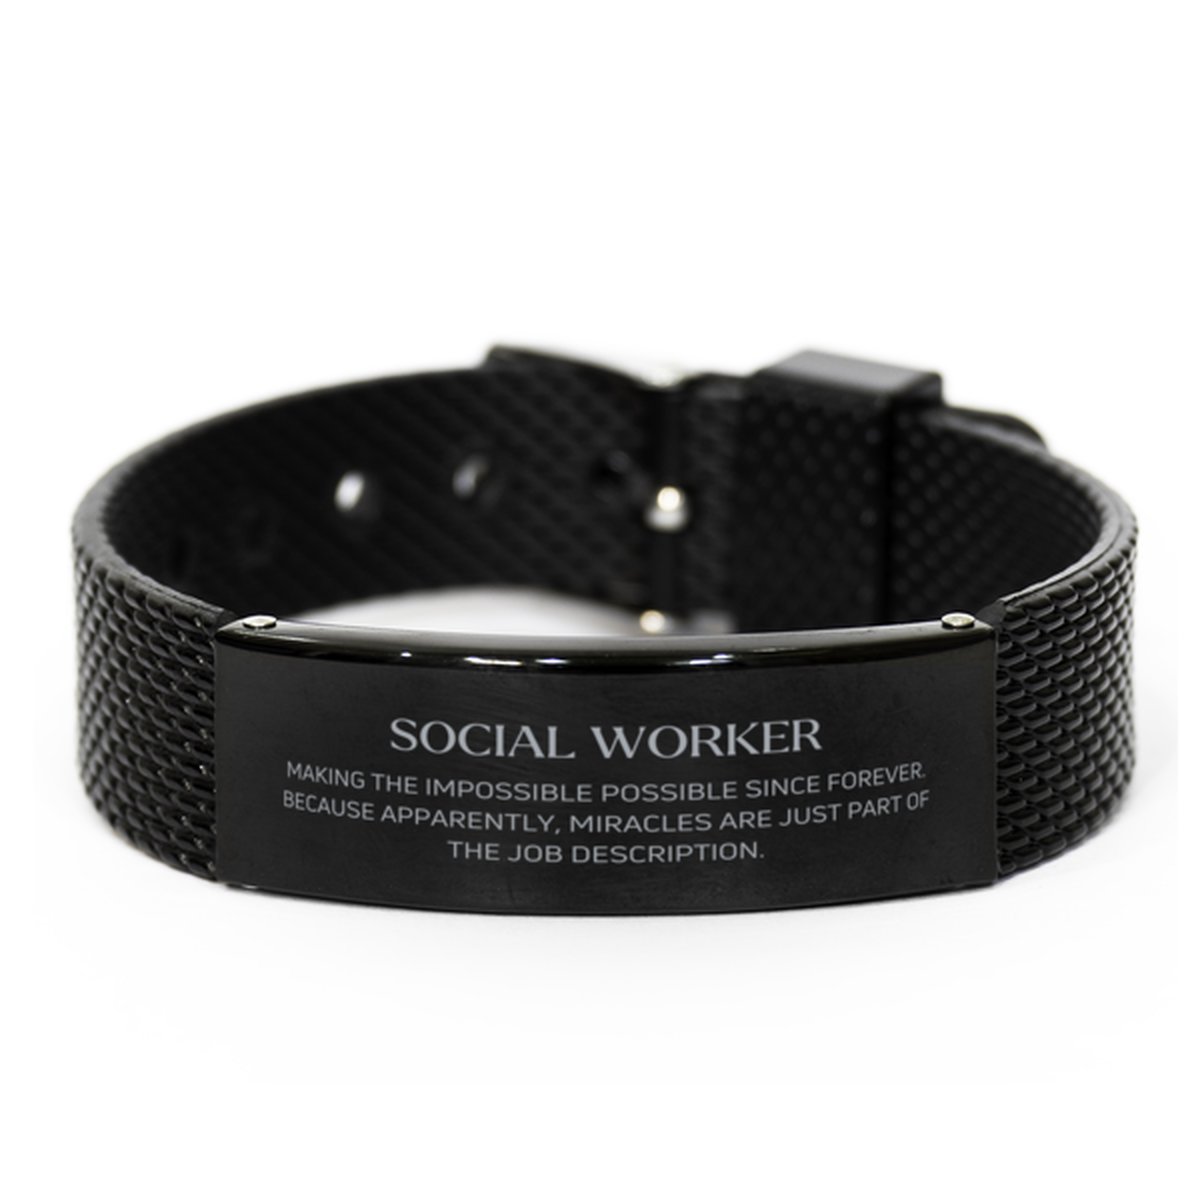 Funny Social Worker Gifts, Miracles are just part of the job description, Inspirational Birthday Black Shark Mesh Bracelet For Social Worker, Men, Women, Coworkers, Friends, Boss